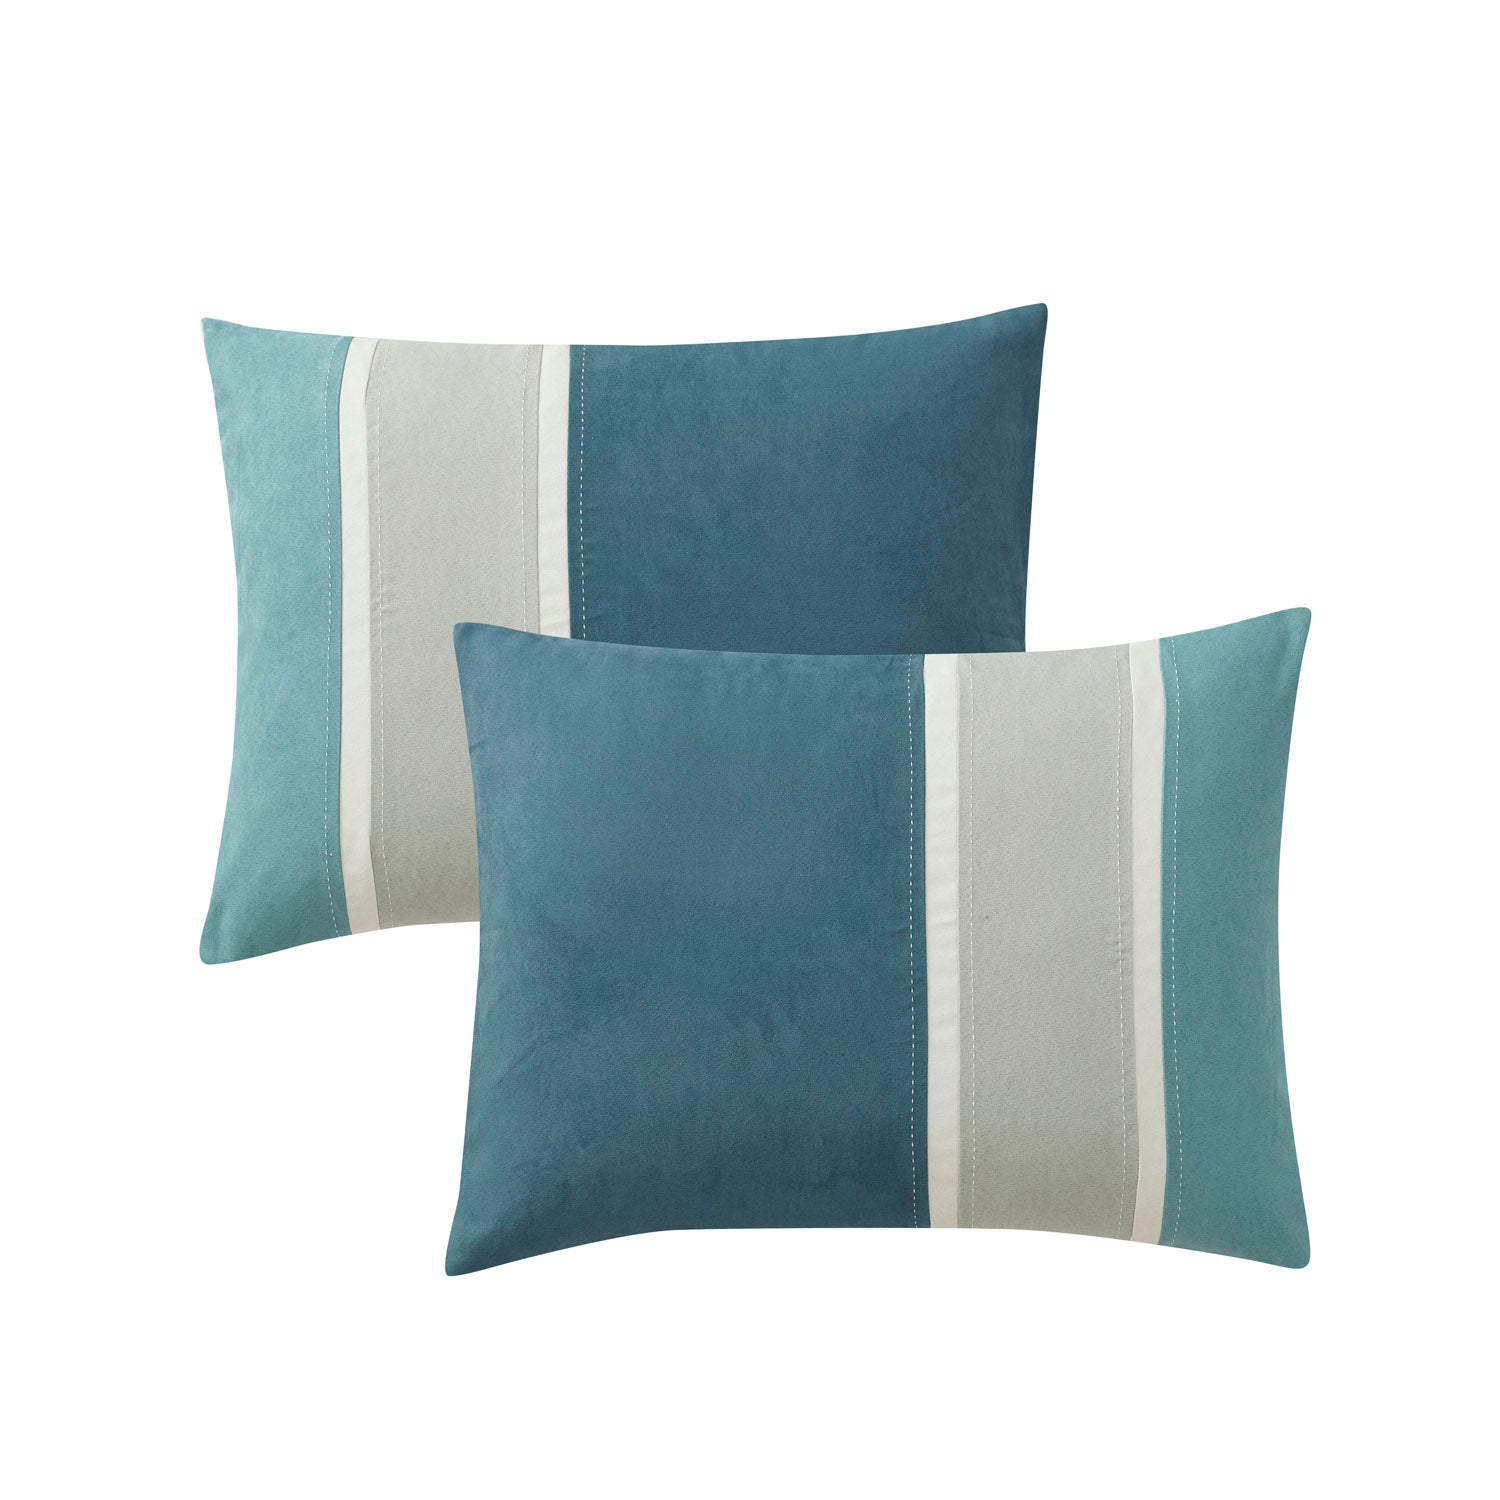 Harvey 7-Piece Suede Bed in a Bag Set, Teal - Pillowcases